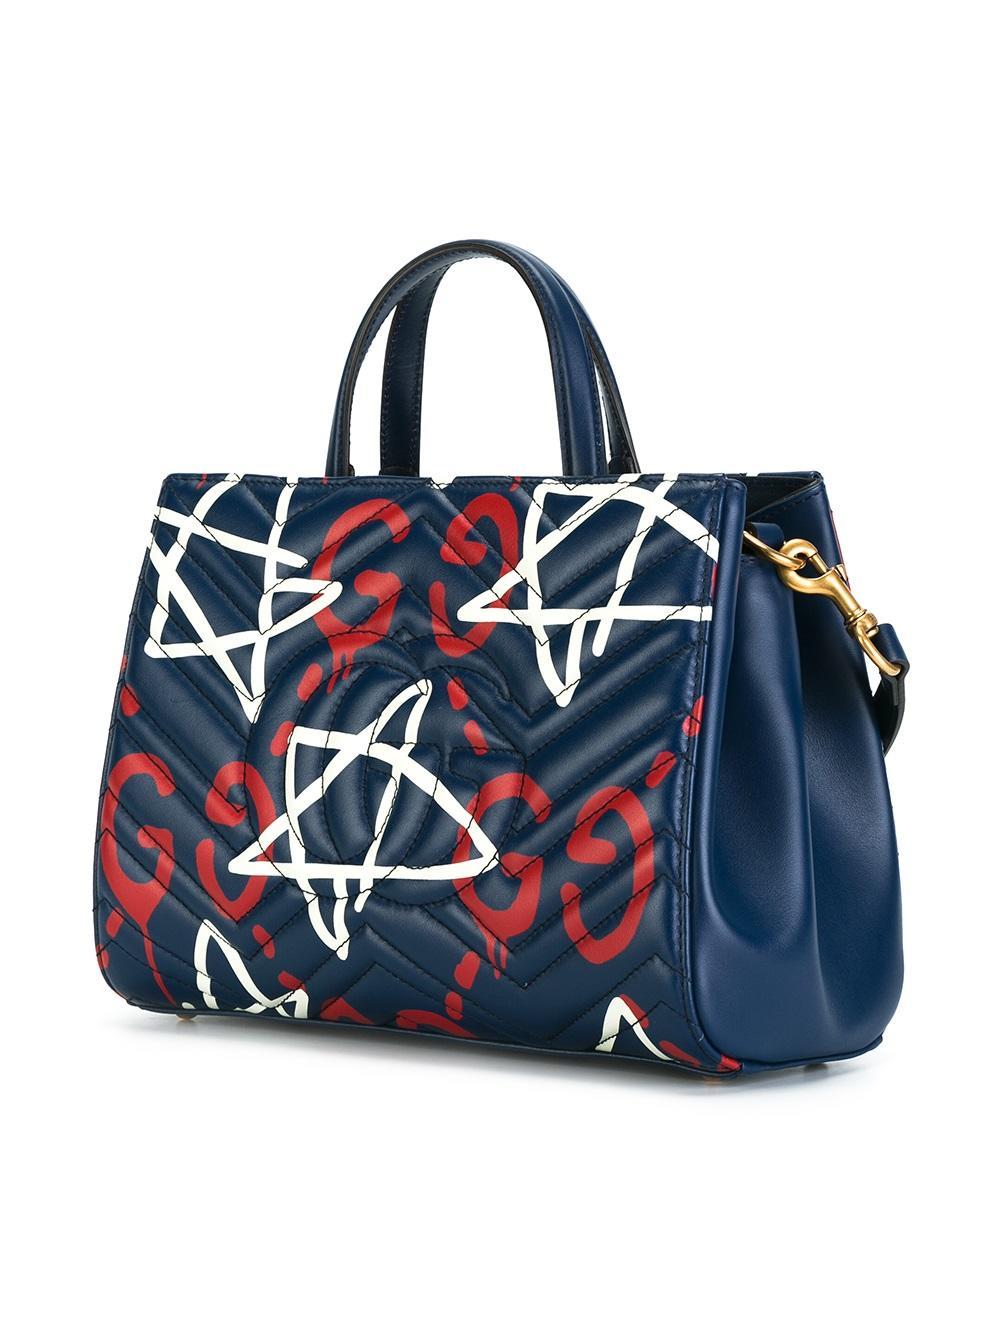 Gucci Leather Ghost Gg Marmont Shopping Bag in Blue - Lyst